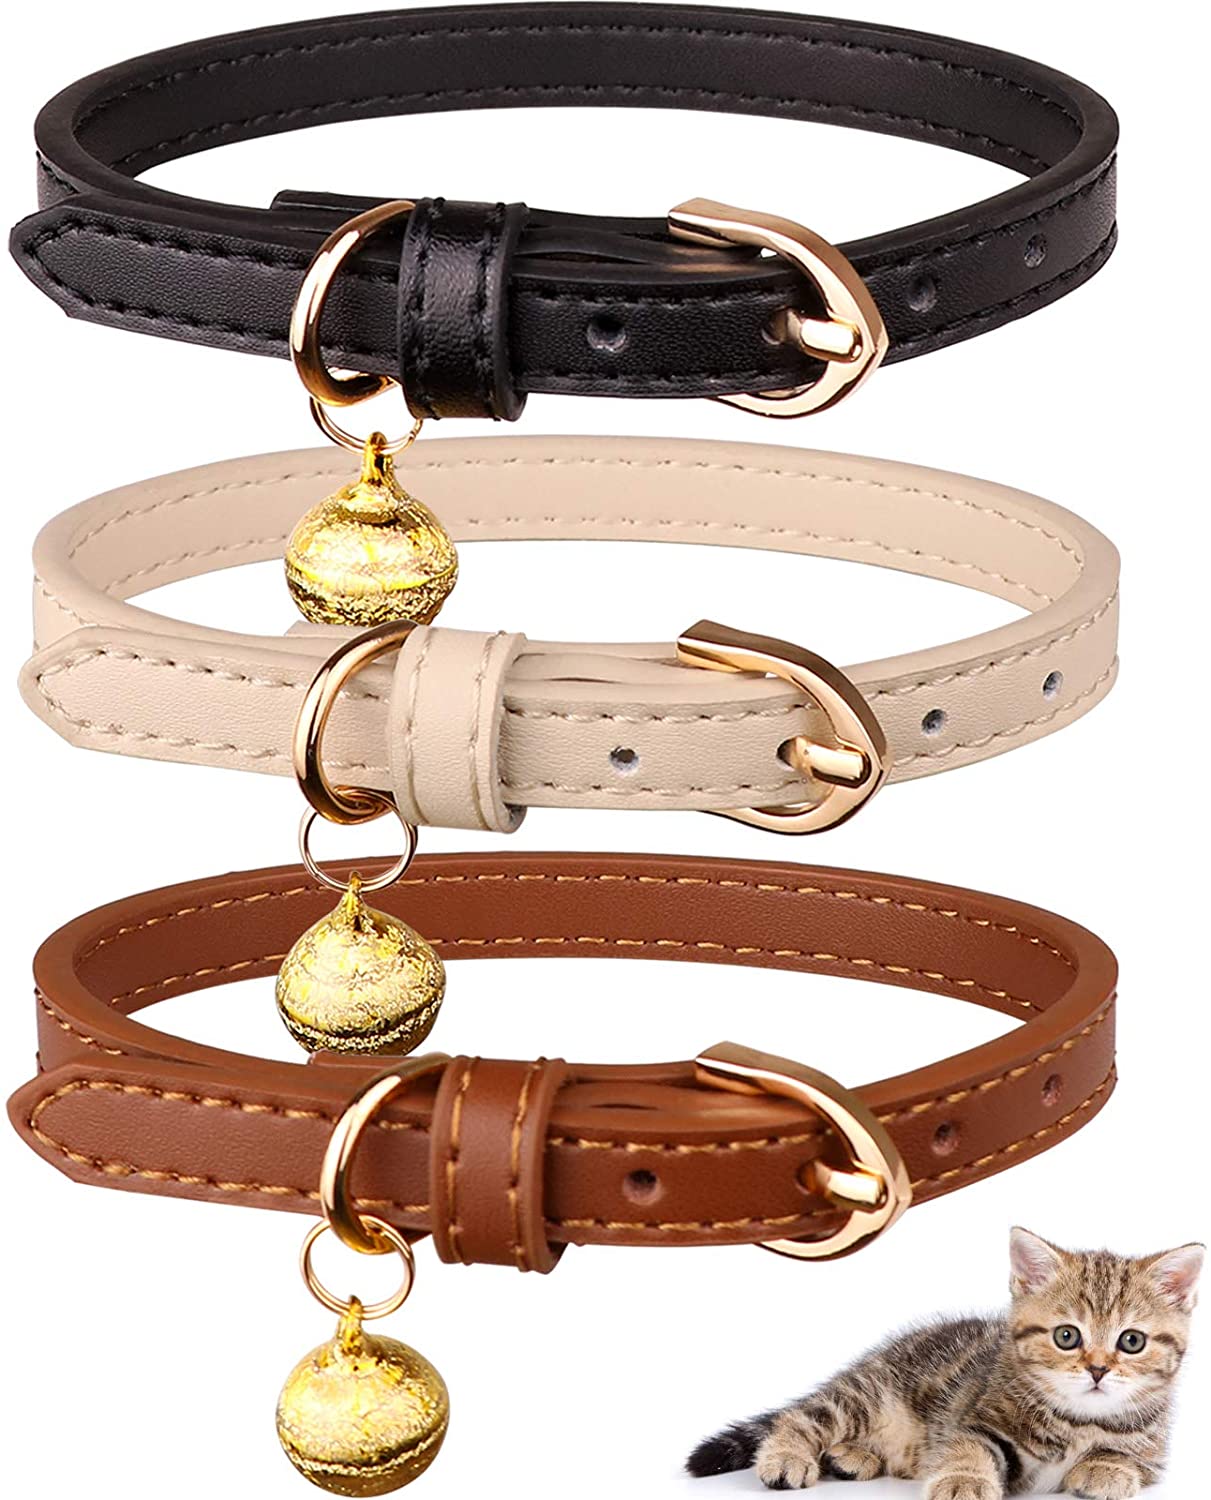 Jamktepat 3 Pack Leather Cat Collars with Bells Soft Pet Safety Collar Kitten Collars with Bell Black Chocolate Beige